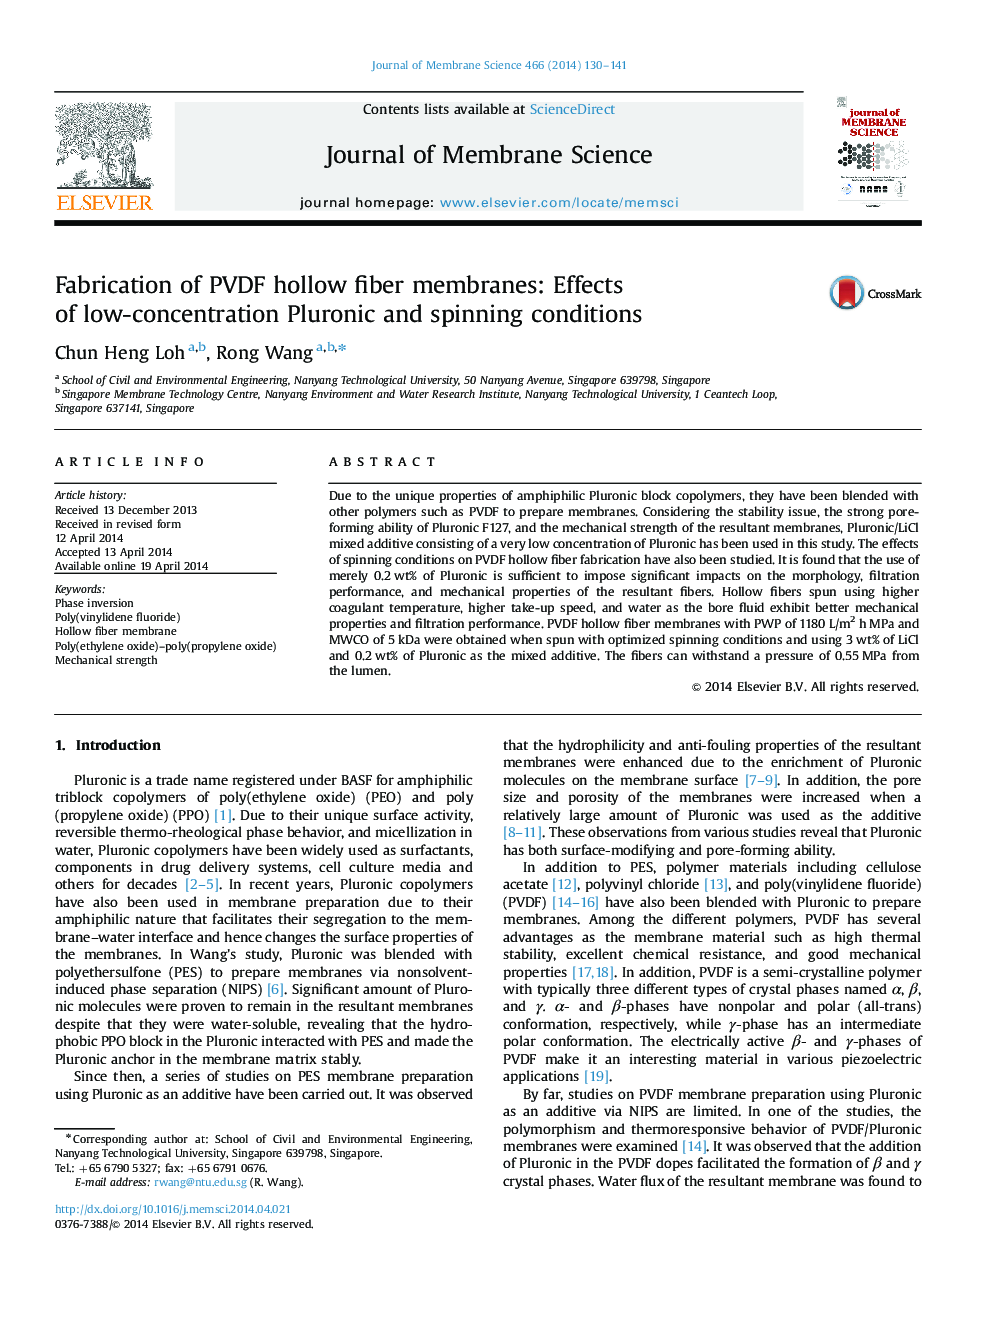 Fabrication of PVDF hollow fiber membranes: Effects of low-concentration Pluronic and spinning conditions